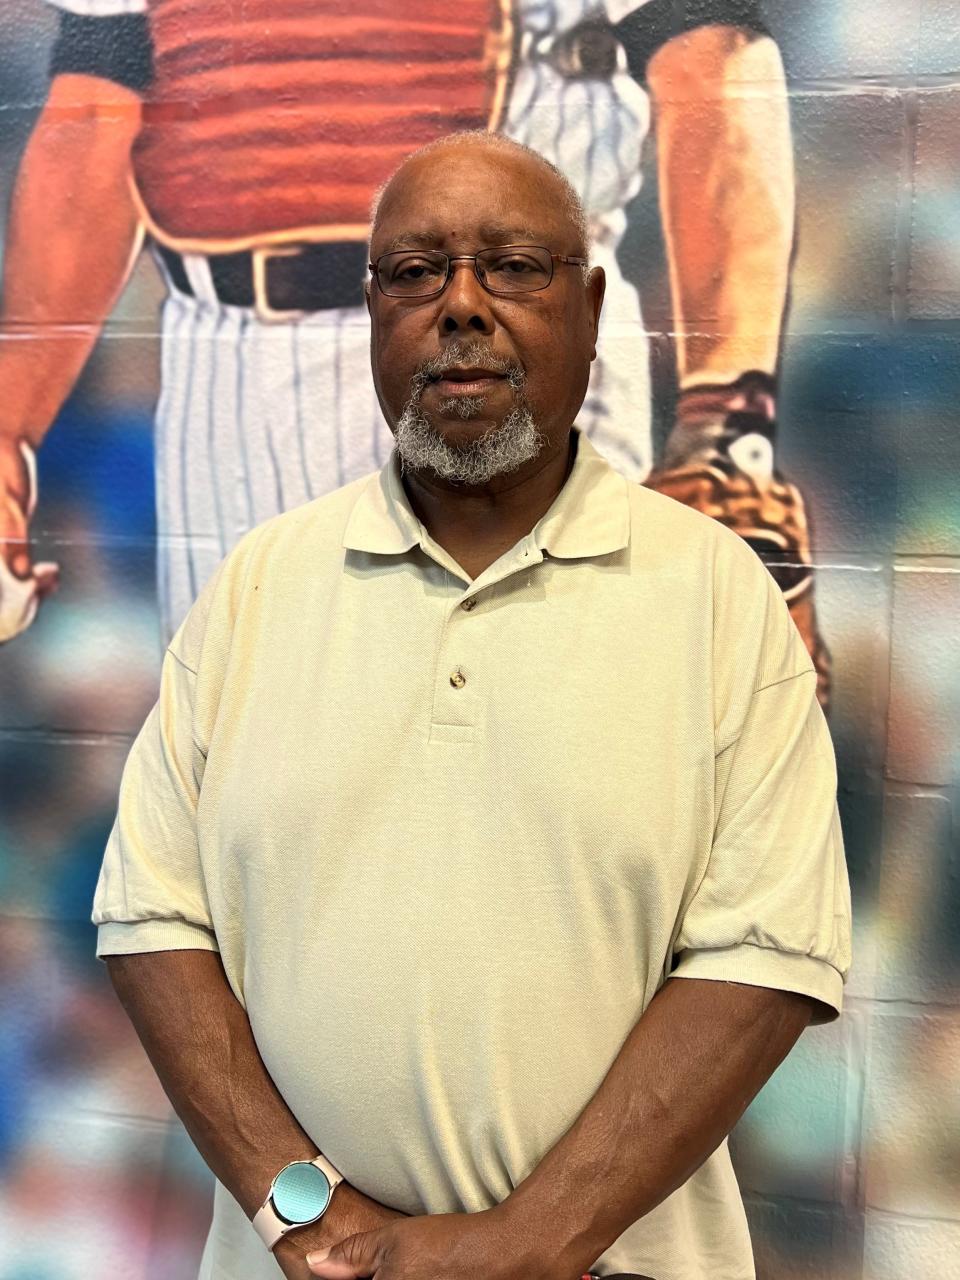 Charles Hairston is to be enshrined Aug. 17 in the Hall of Fame for the Boys and Girls Club of Canton at J. Babe Stearn Community Center. A dinner will be held at DoubleTree by Hilton Canton Downtown at 320 Market Ave. S.